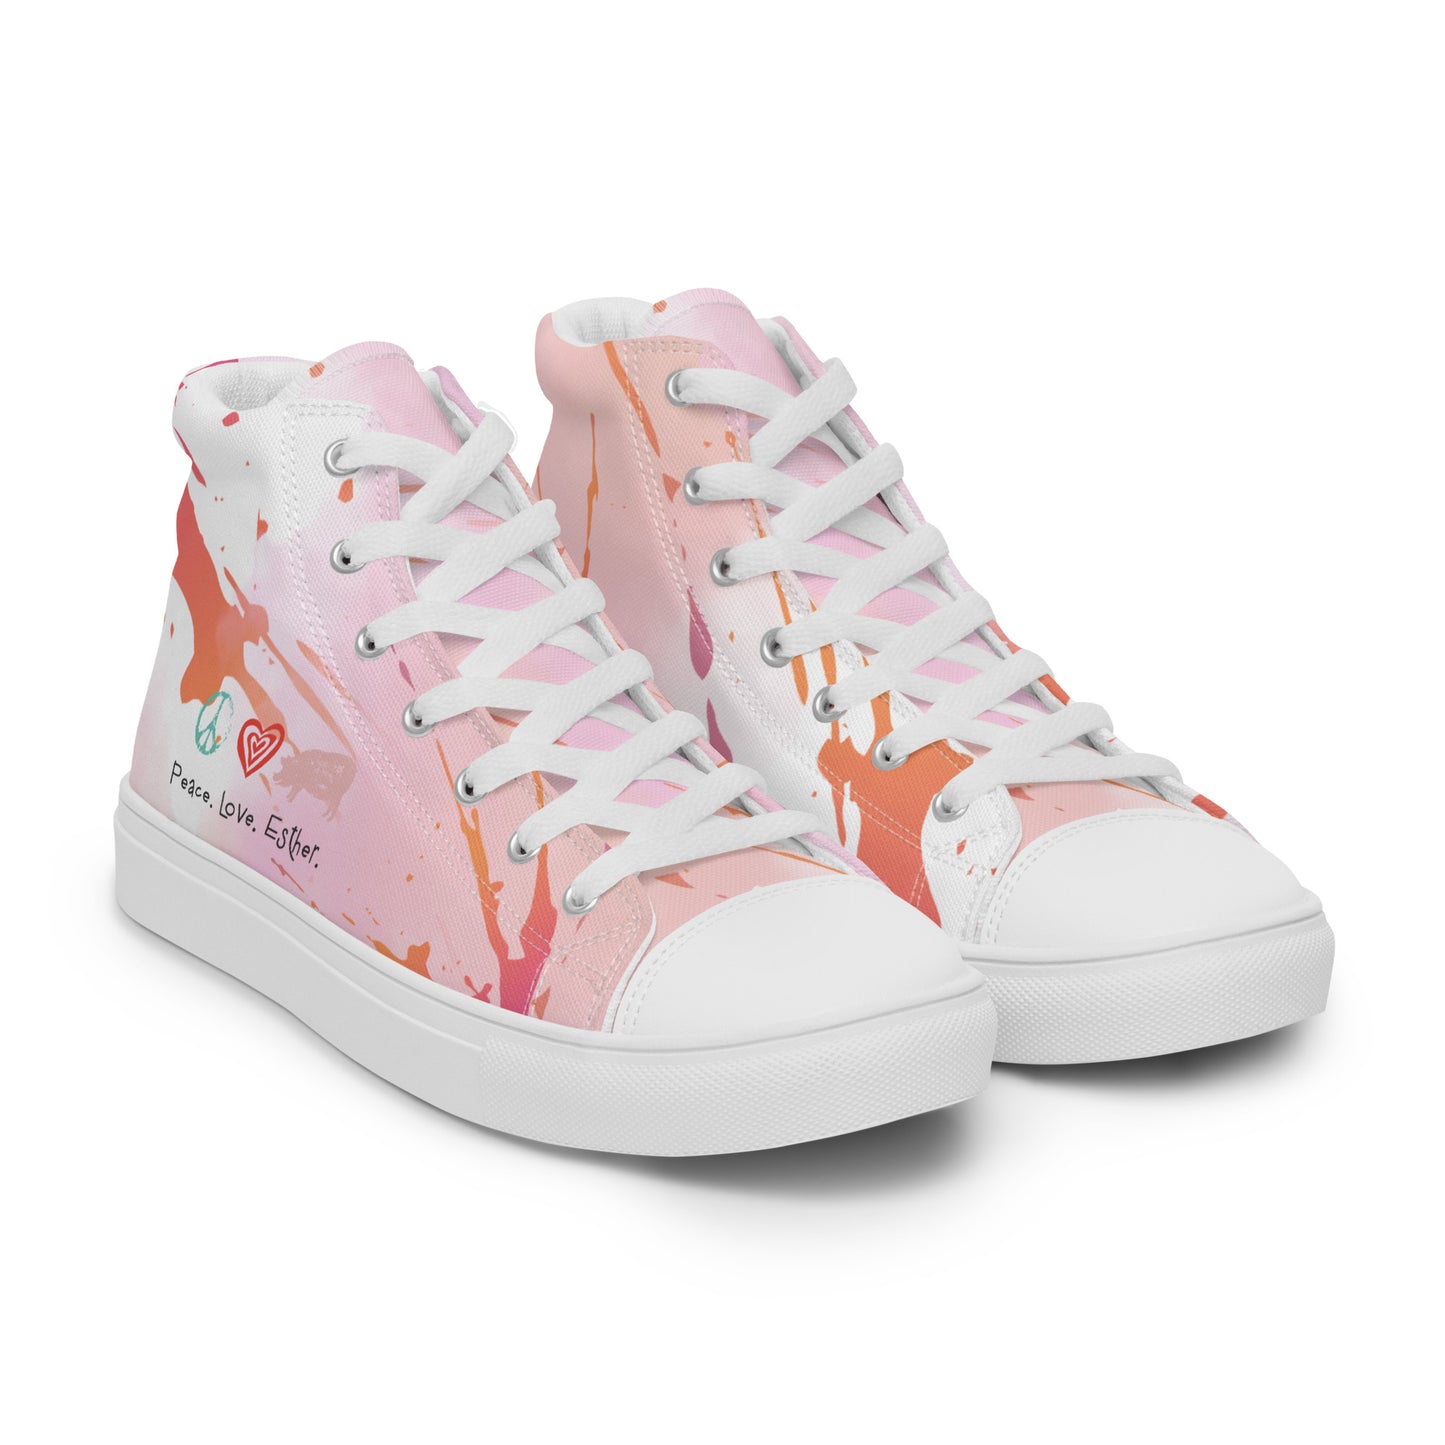 NEW-Ladies high top canvas shoes